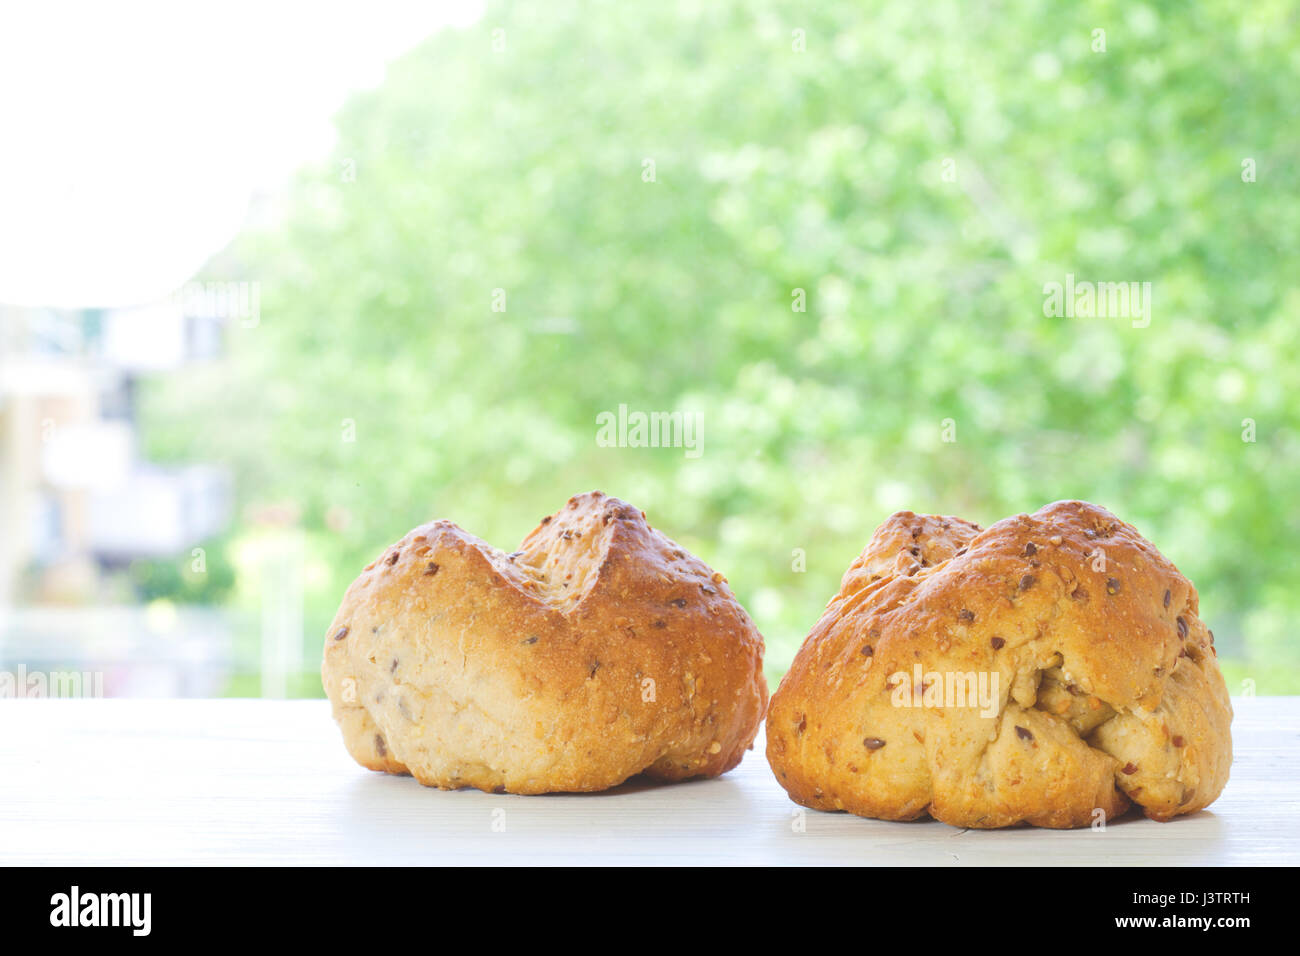 two cereal bread bun with panorama in dof. Stock Photo